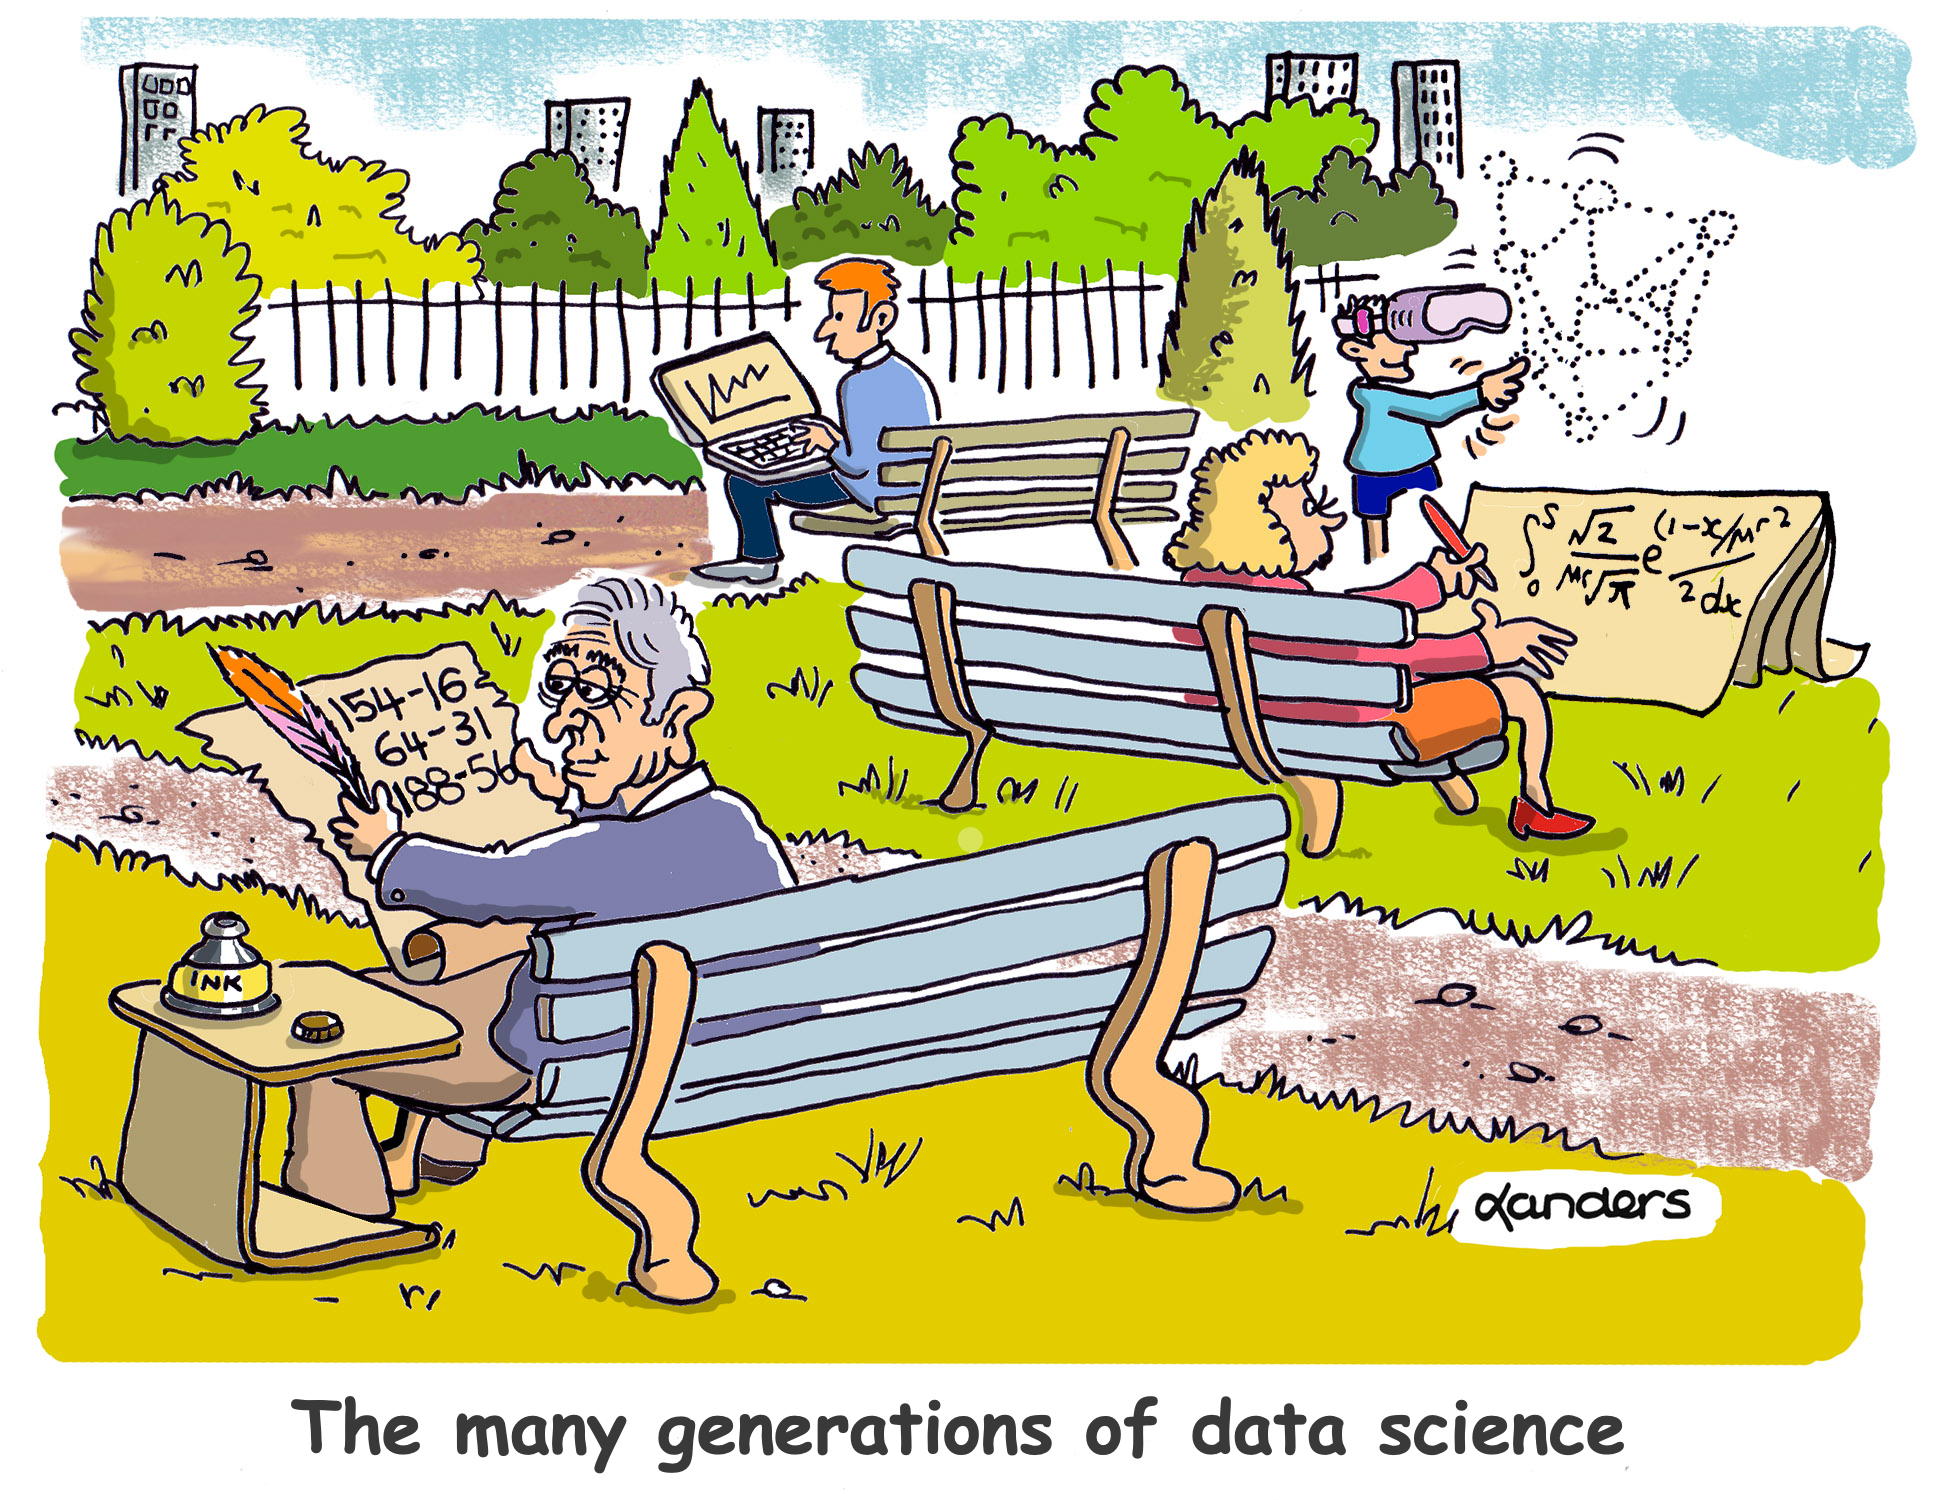 cartoon showing changes in data approaches across generations